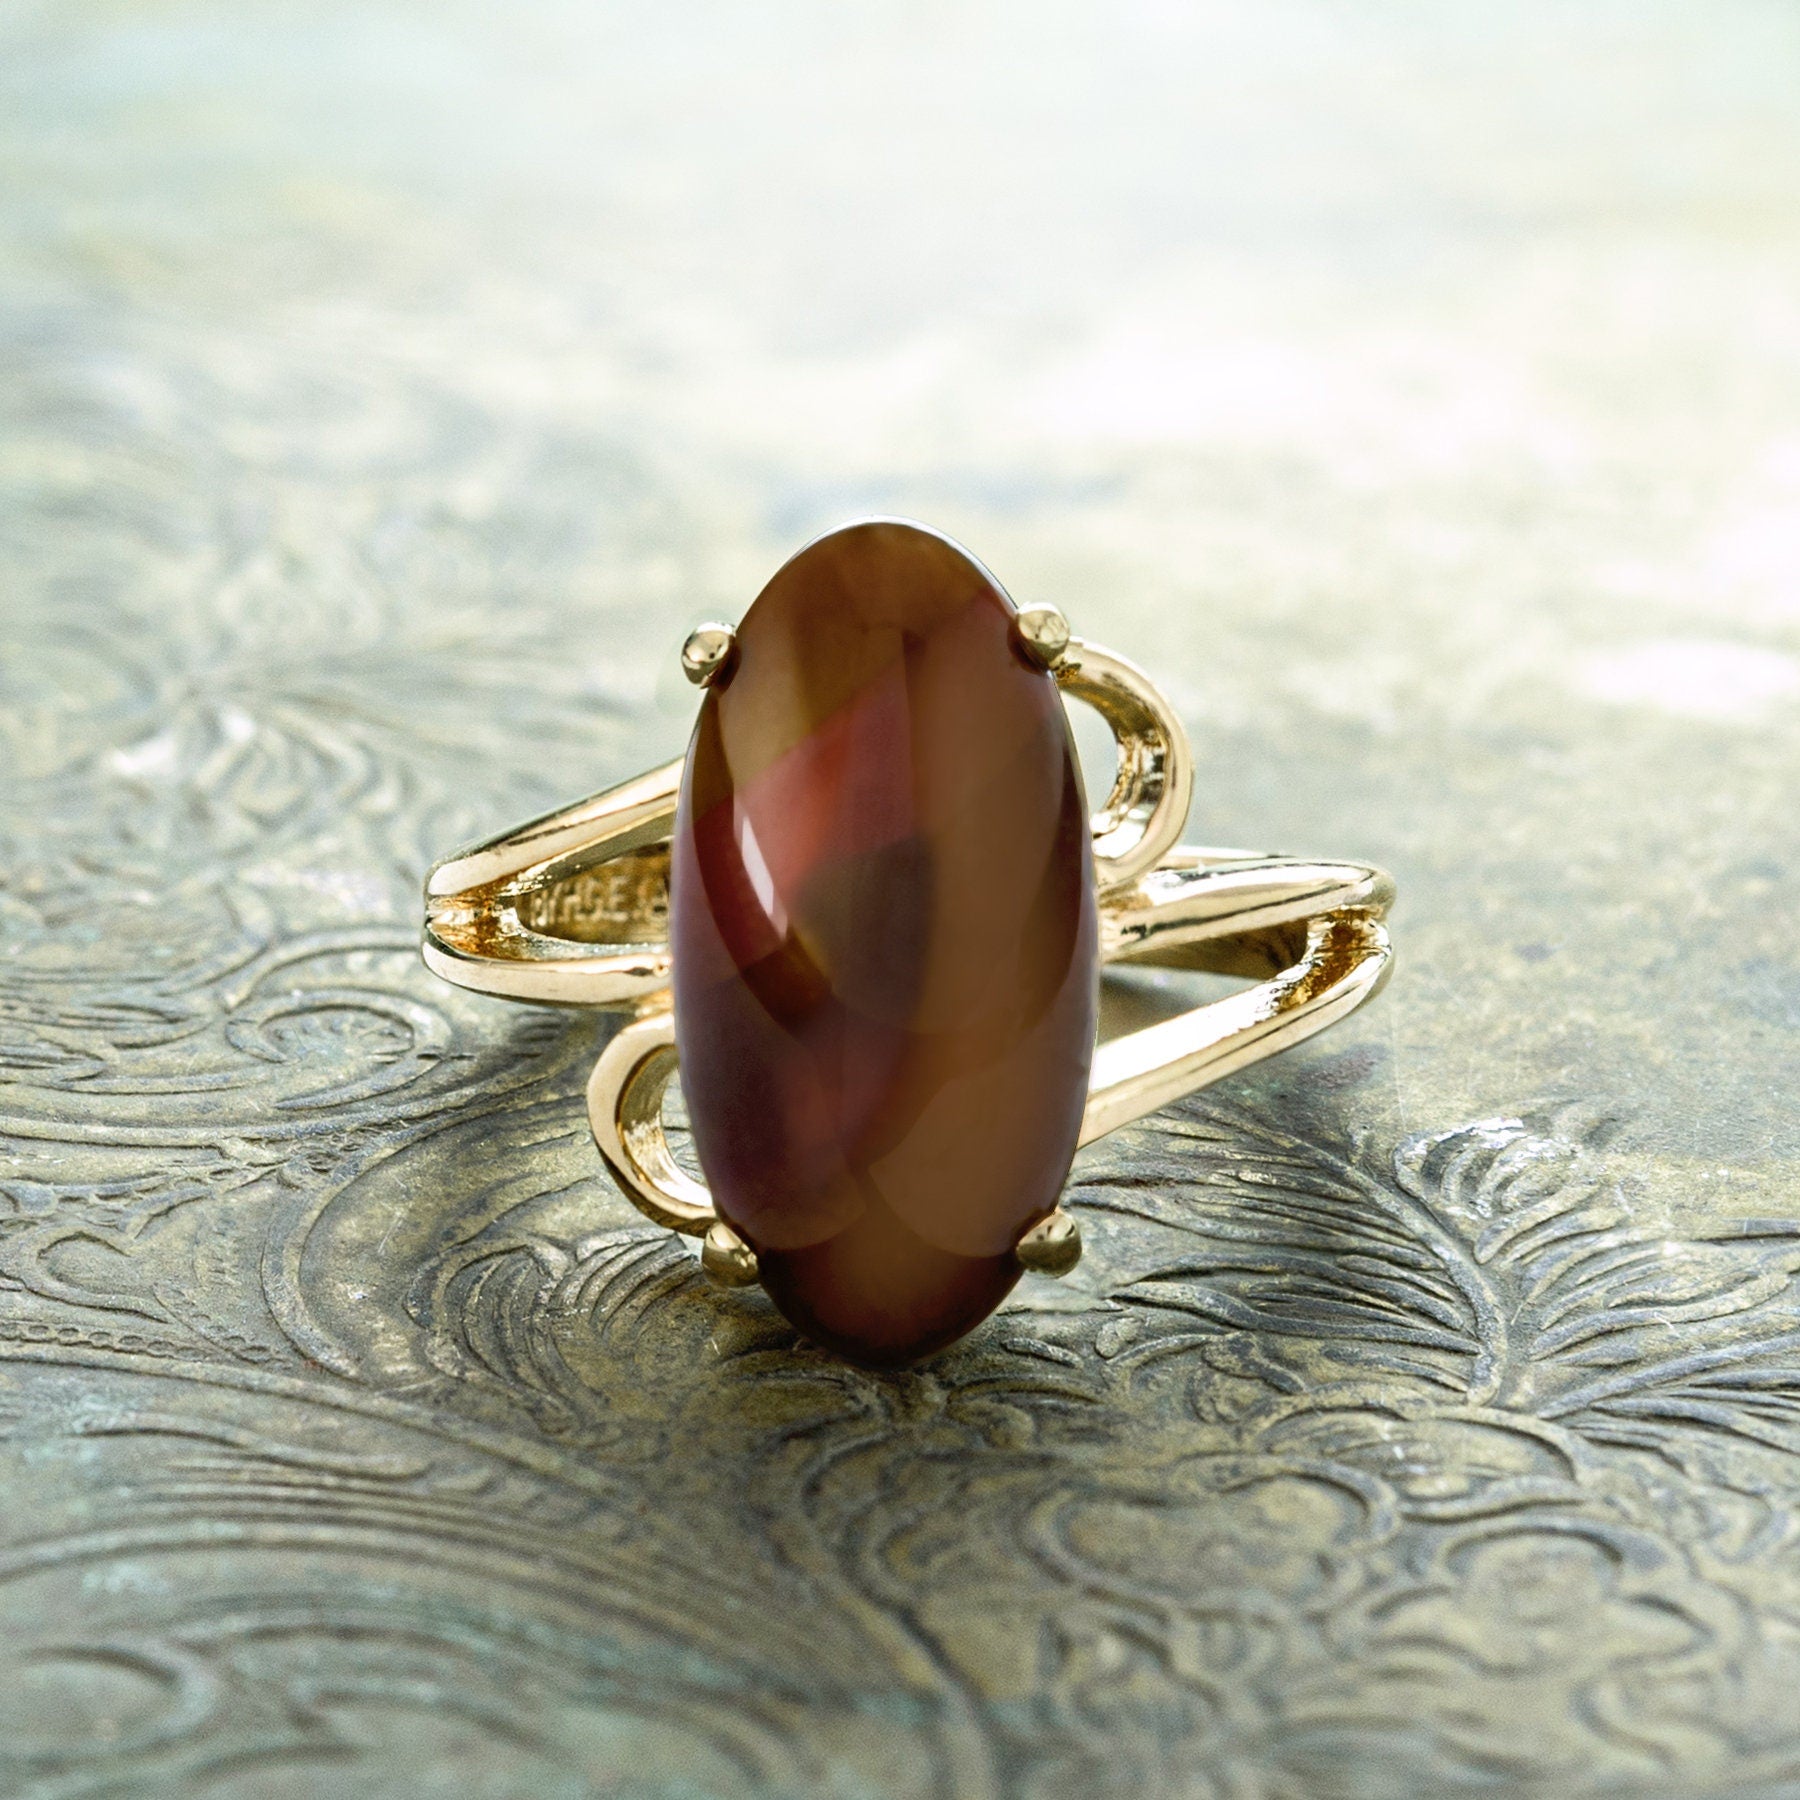 Vintage Ring 1970s Imitation Brown Coral 18k Gold Cocktail Ring #R1846 - Limited Stock - Never Worn